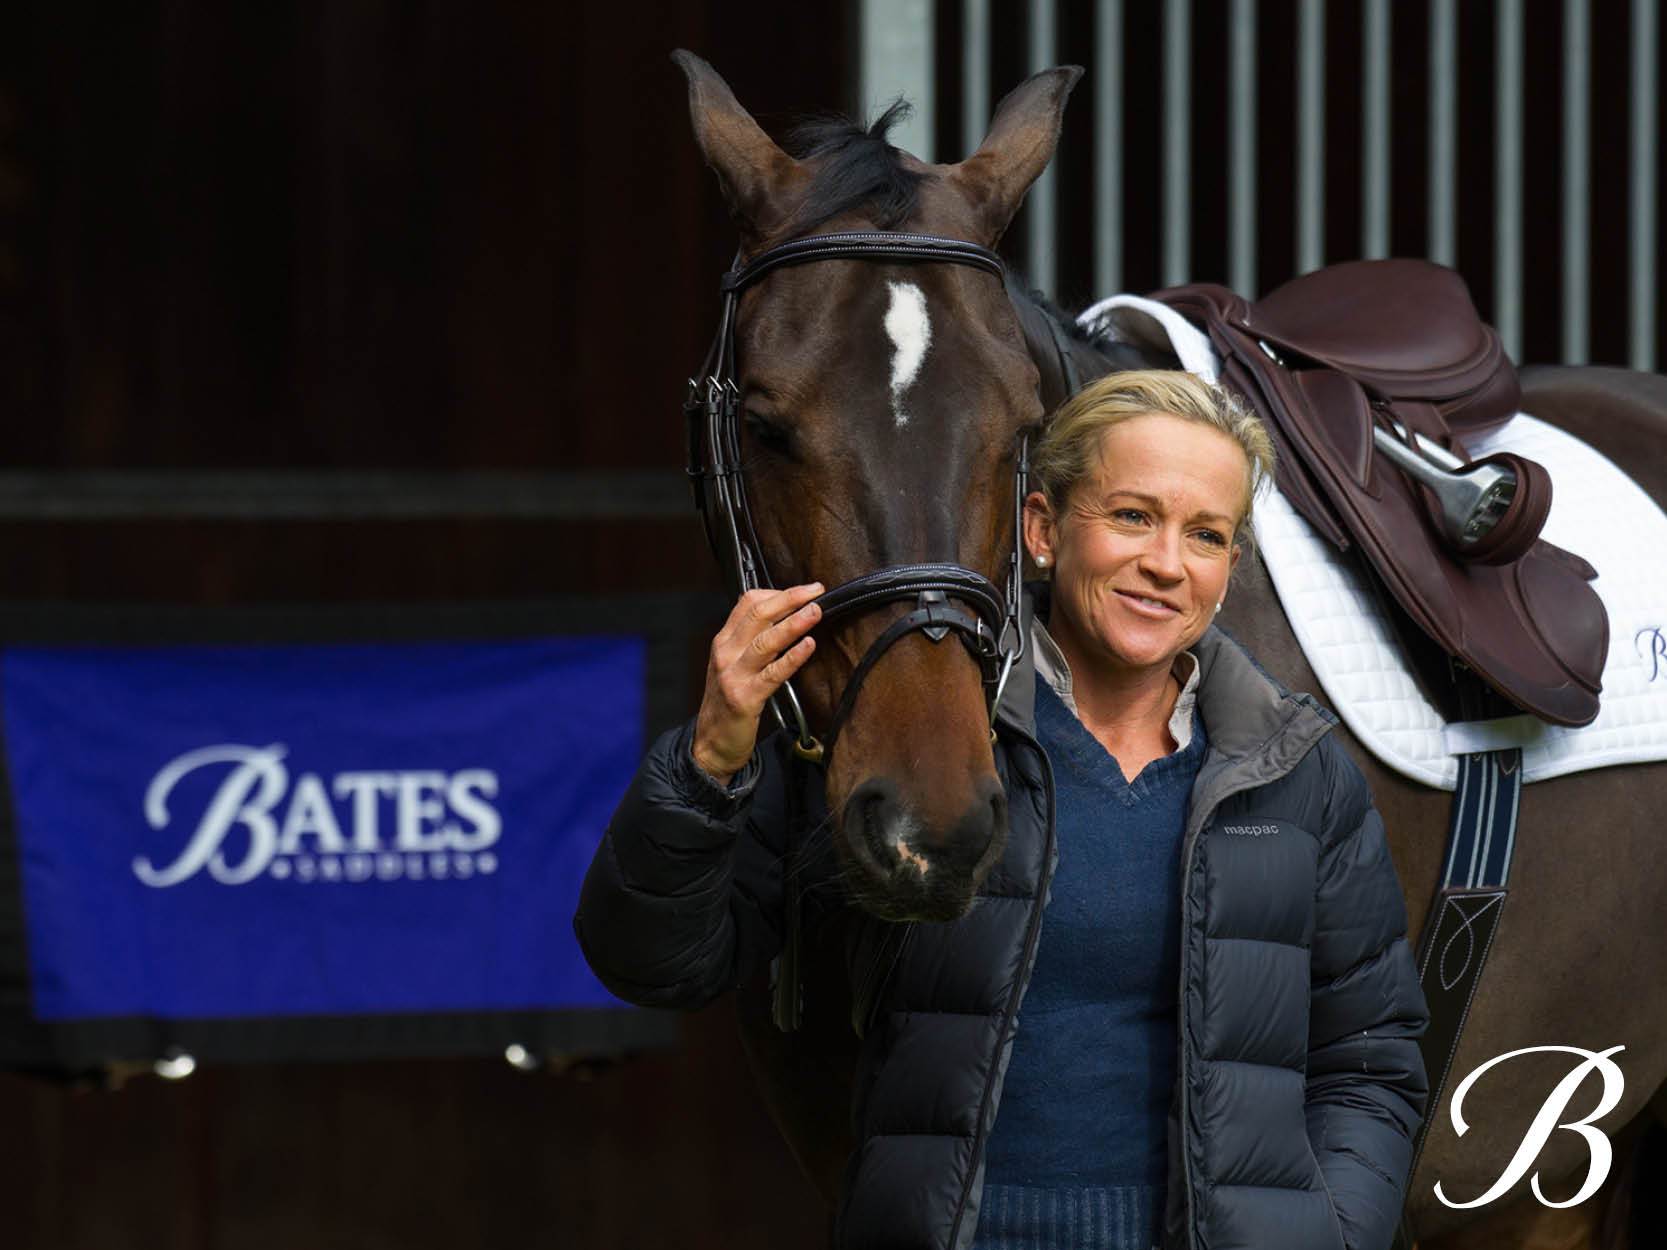 A day in the life of Amanda Ross, Australian Eventer